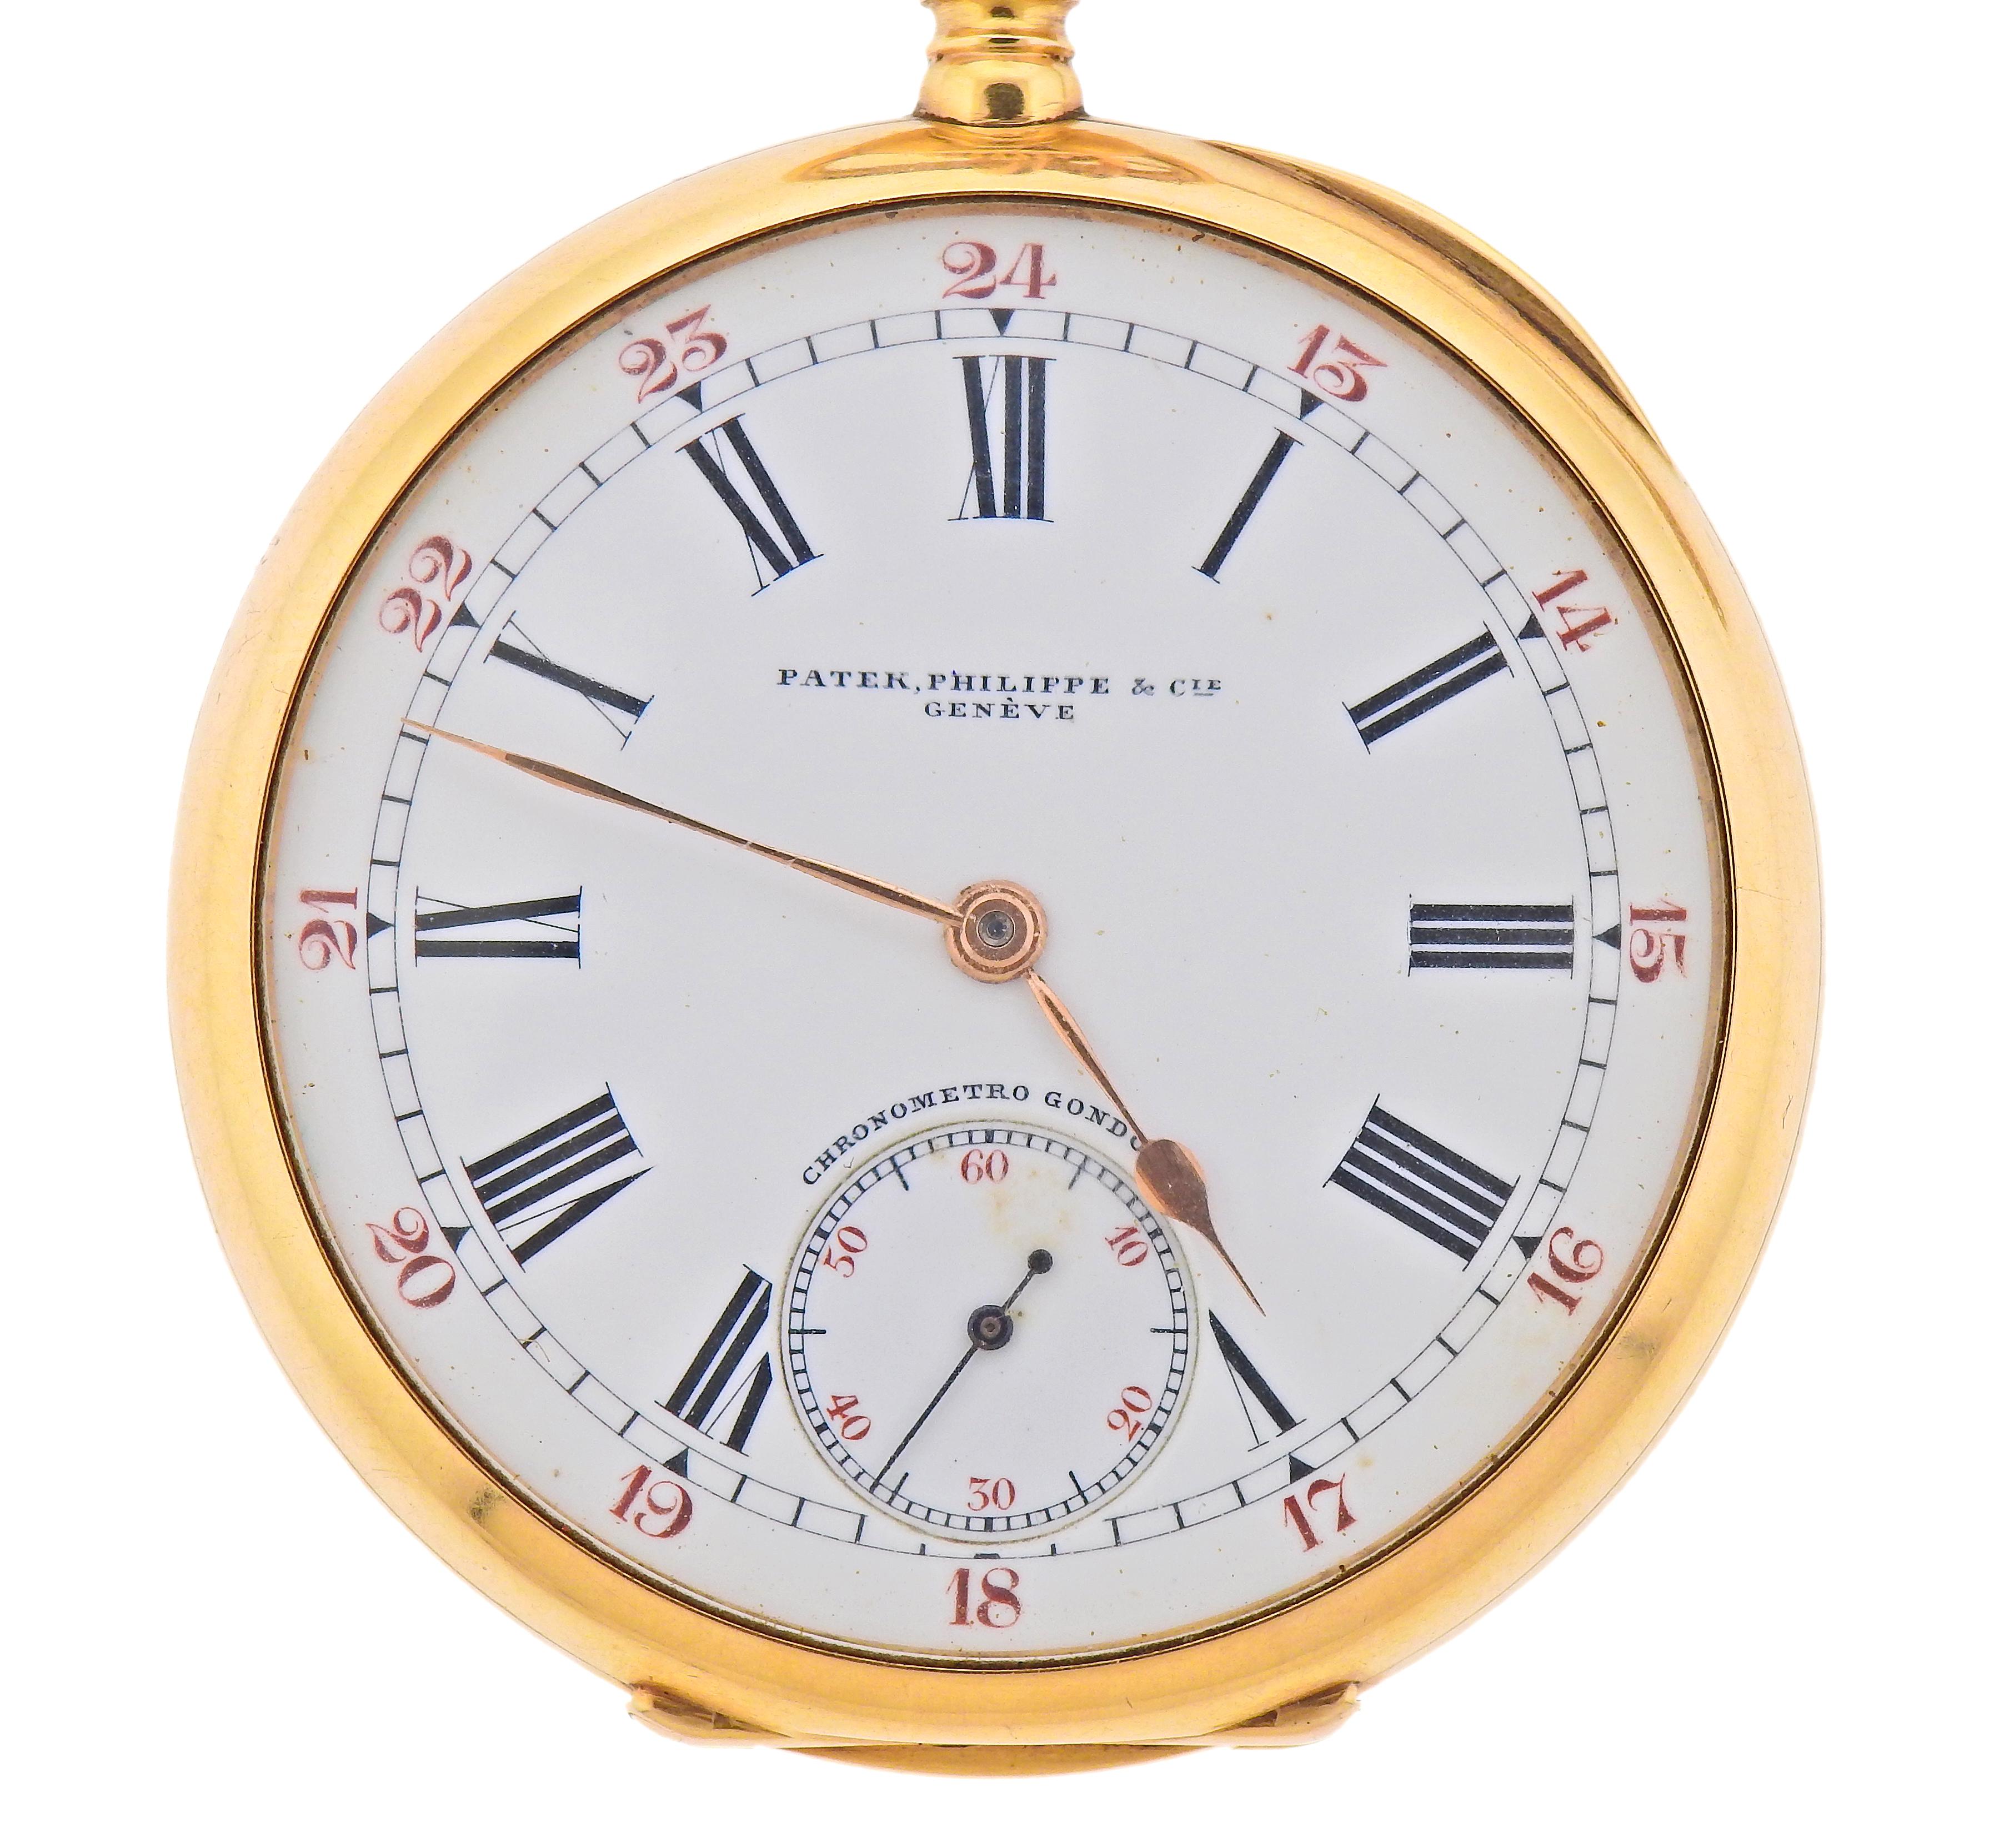 Antique 18k gold Patek Philippe pocket watch. Case is 45mm in diameter, with removable 14k gold chain ( 15.75